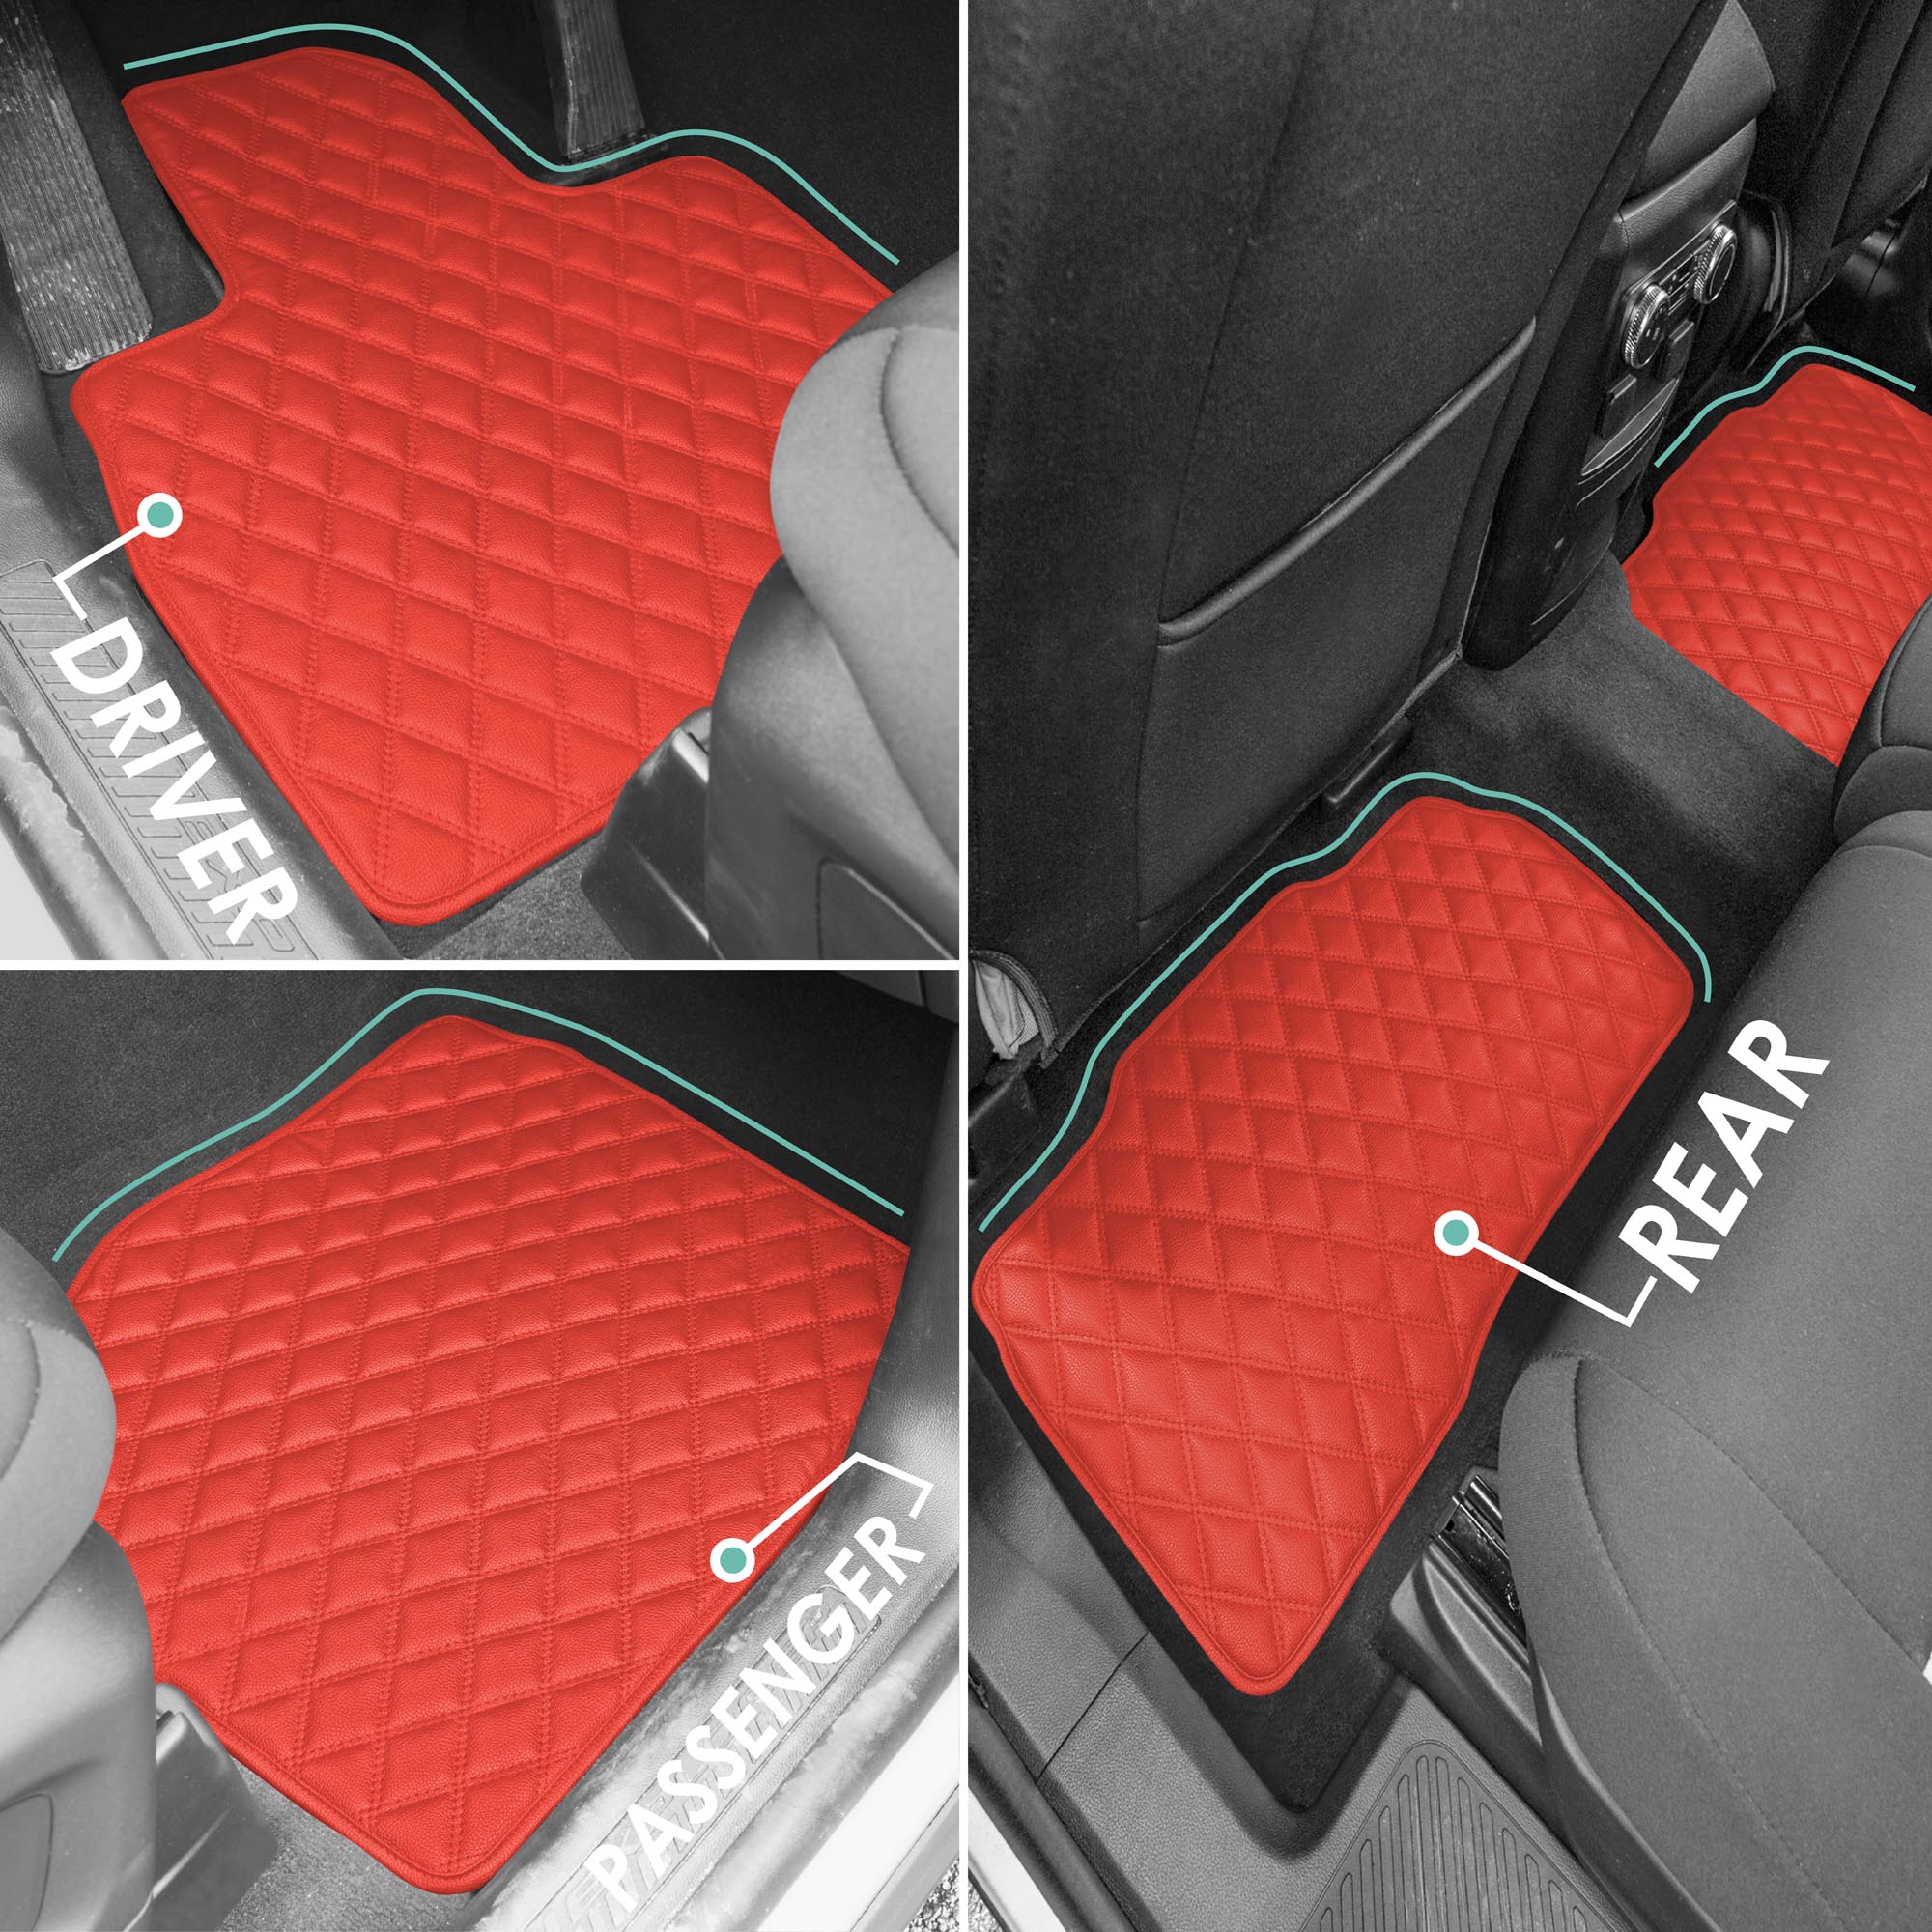 Faux Leather Custom-Fit Floor Mats for 2020–2022 Ford Explorer - Red